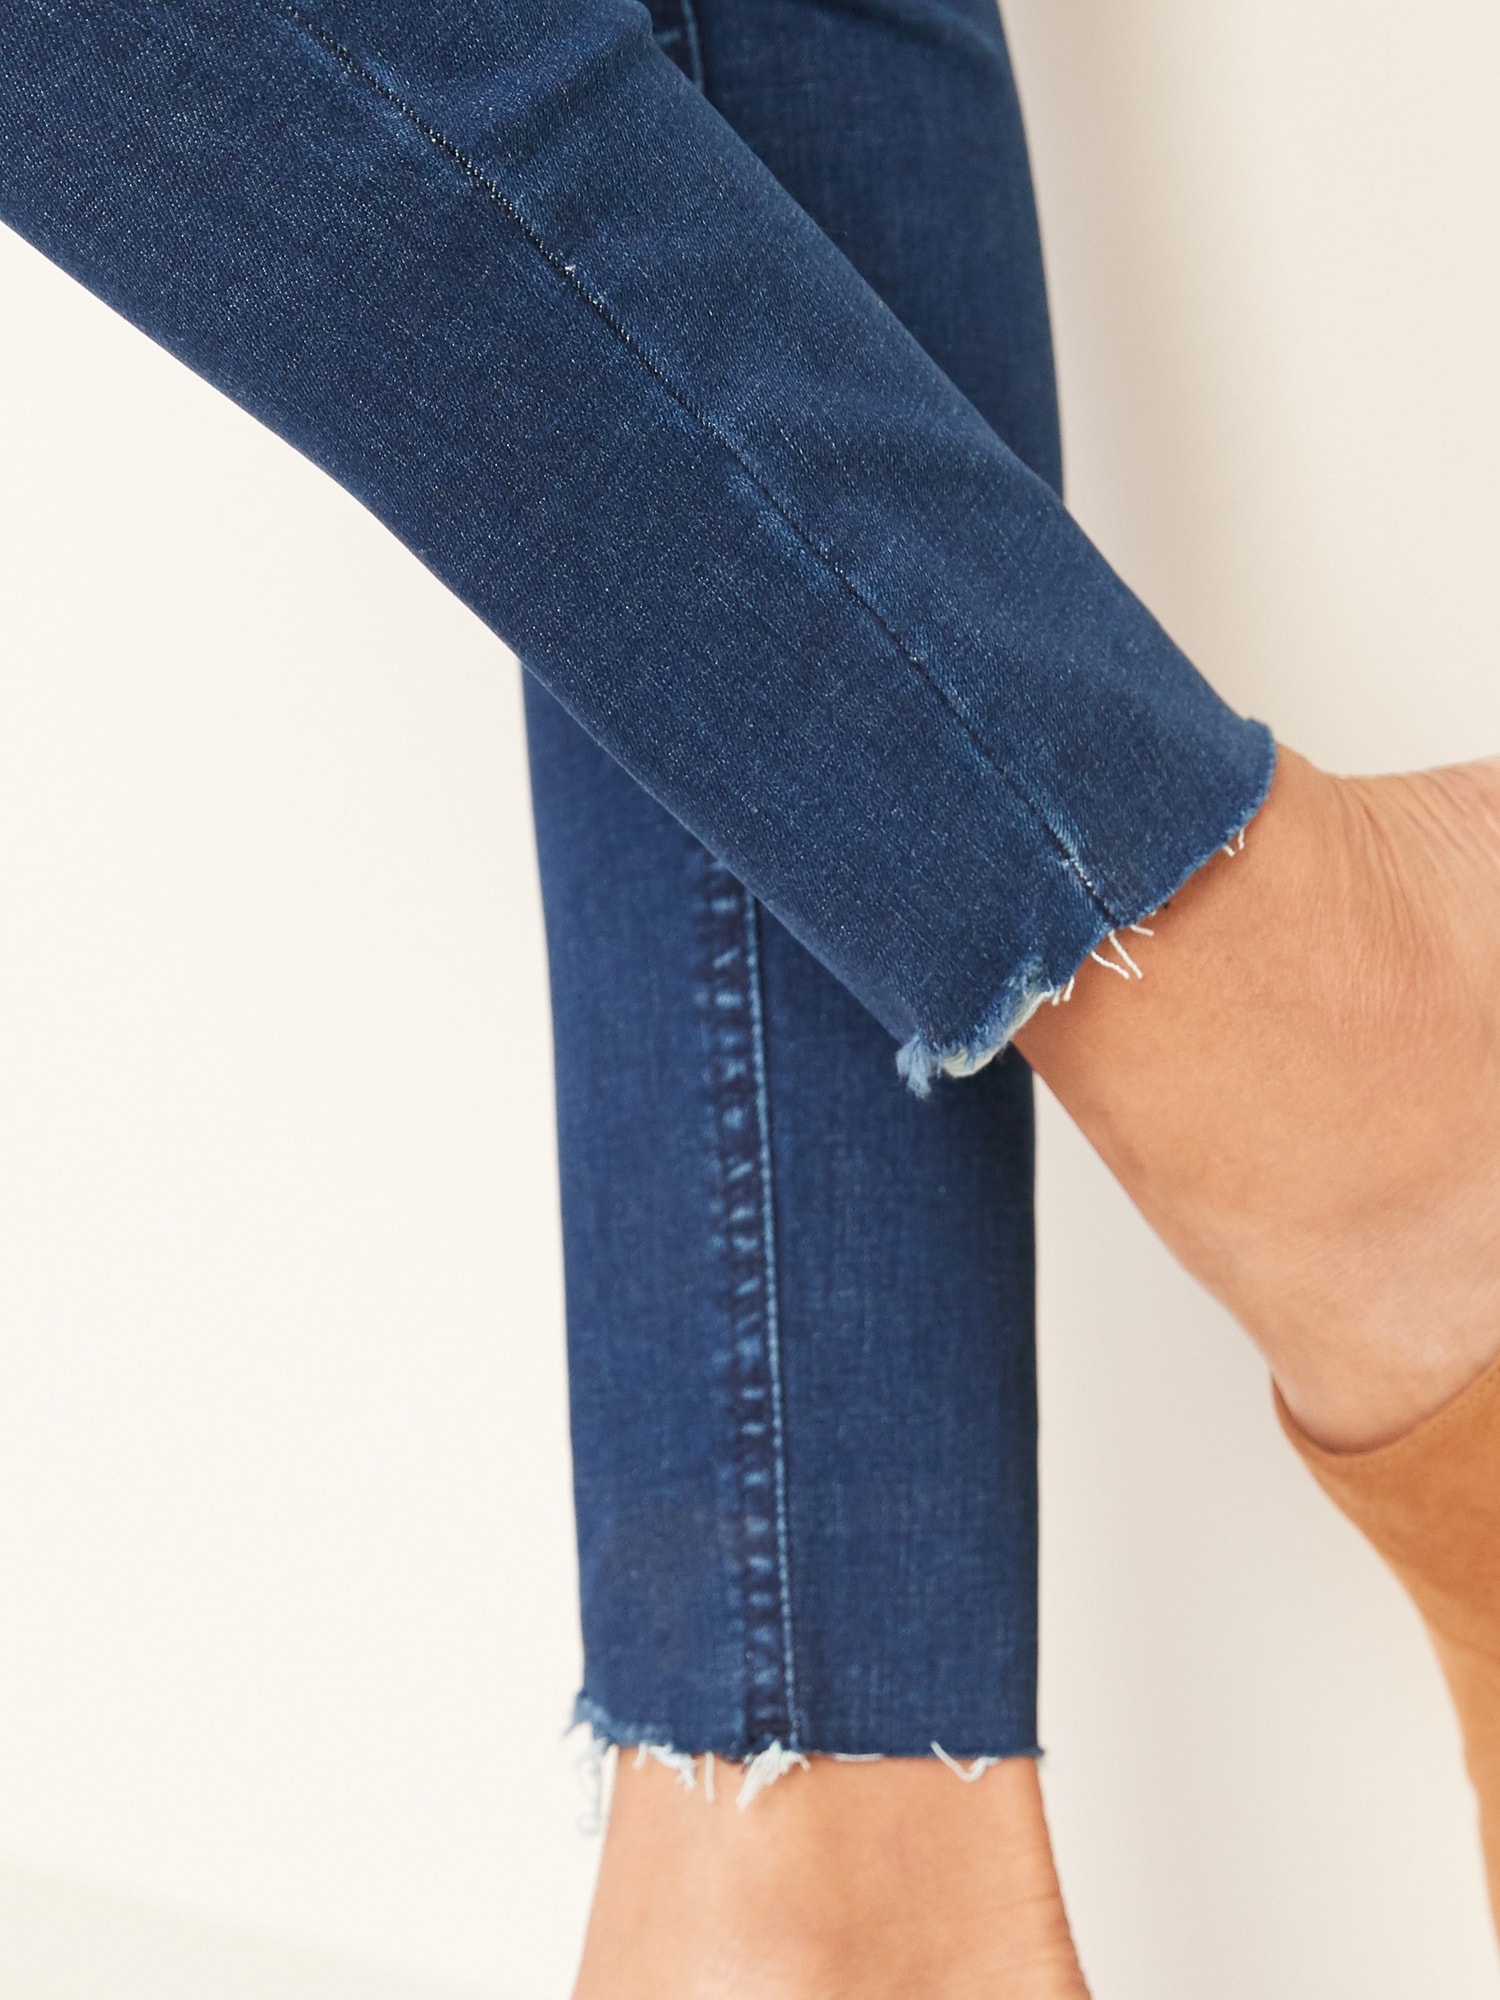 old navy super stretch jeans